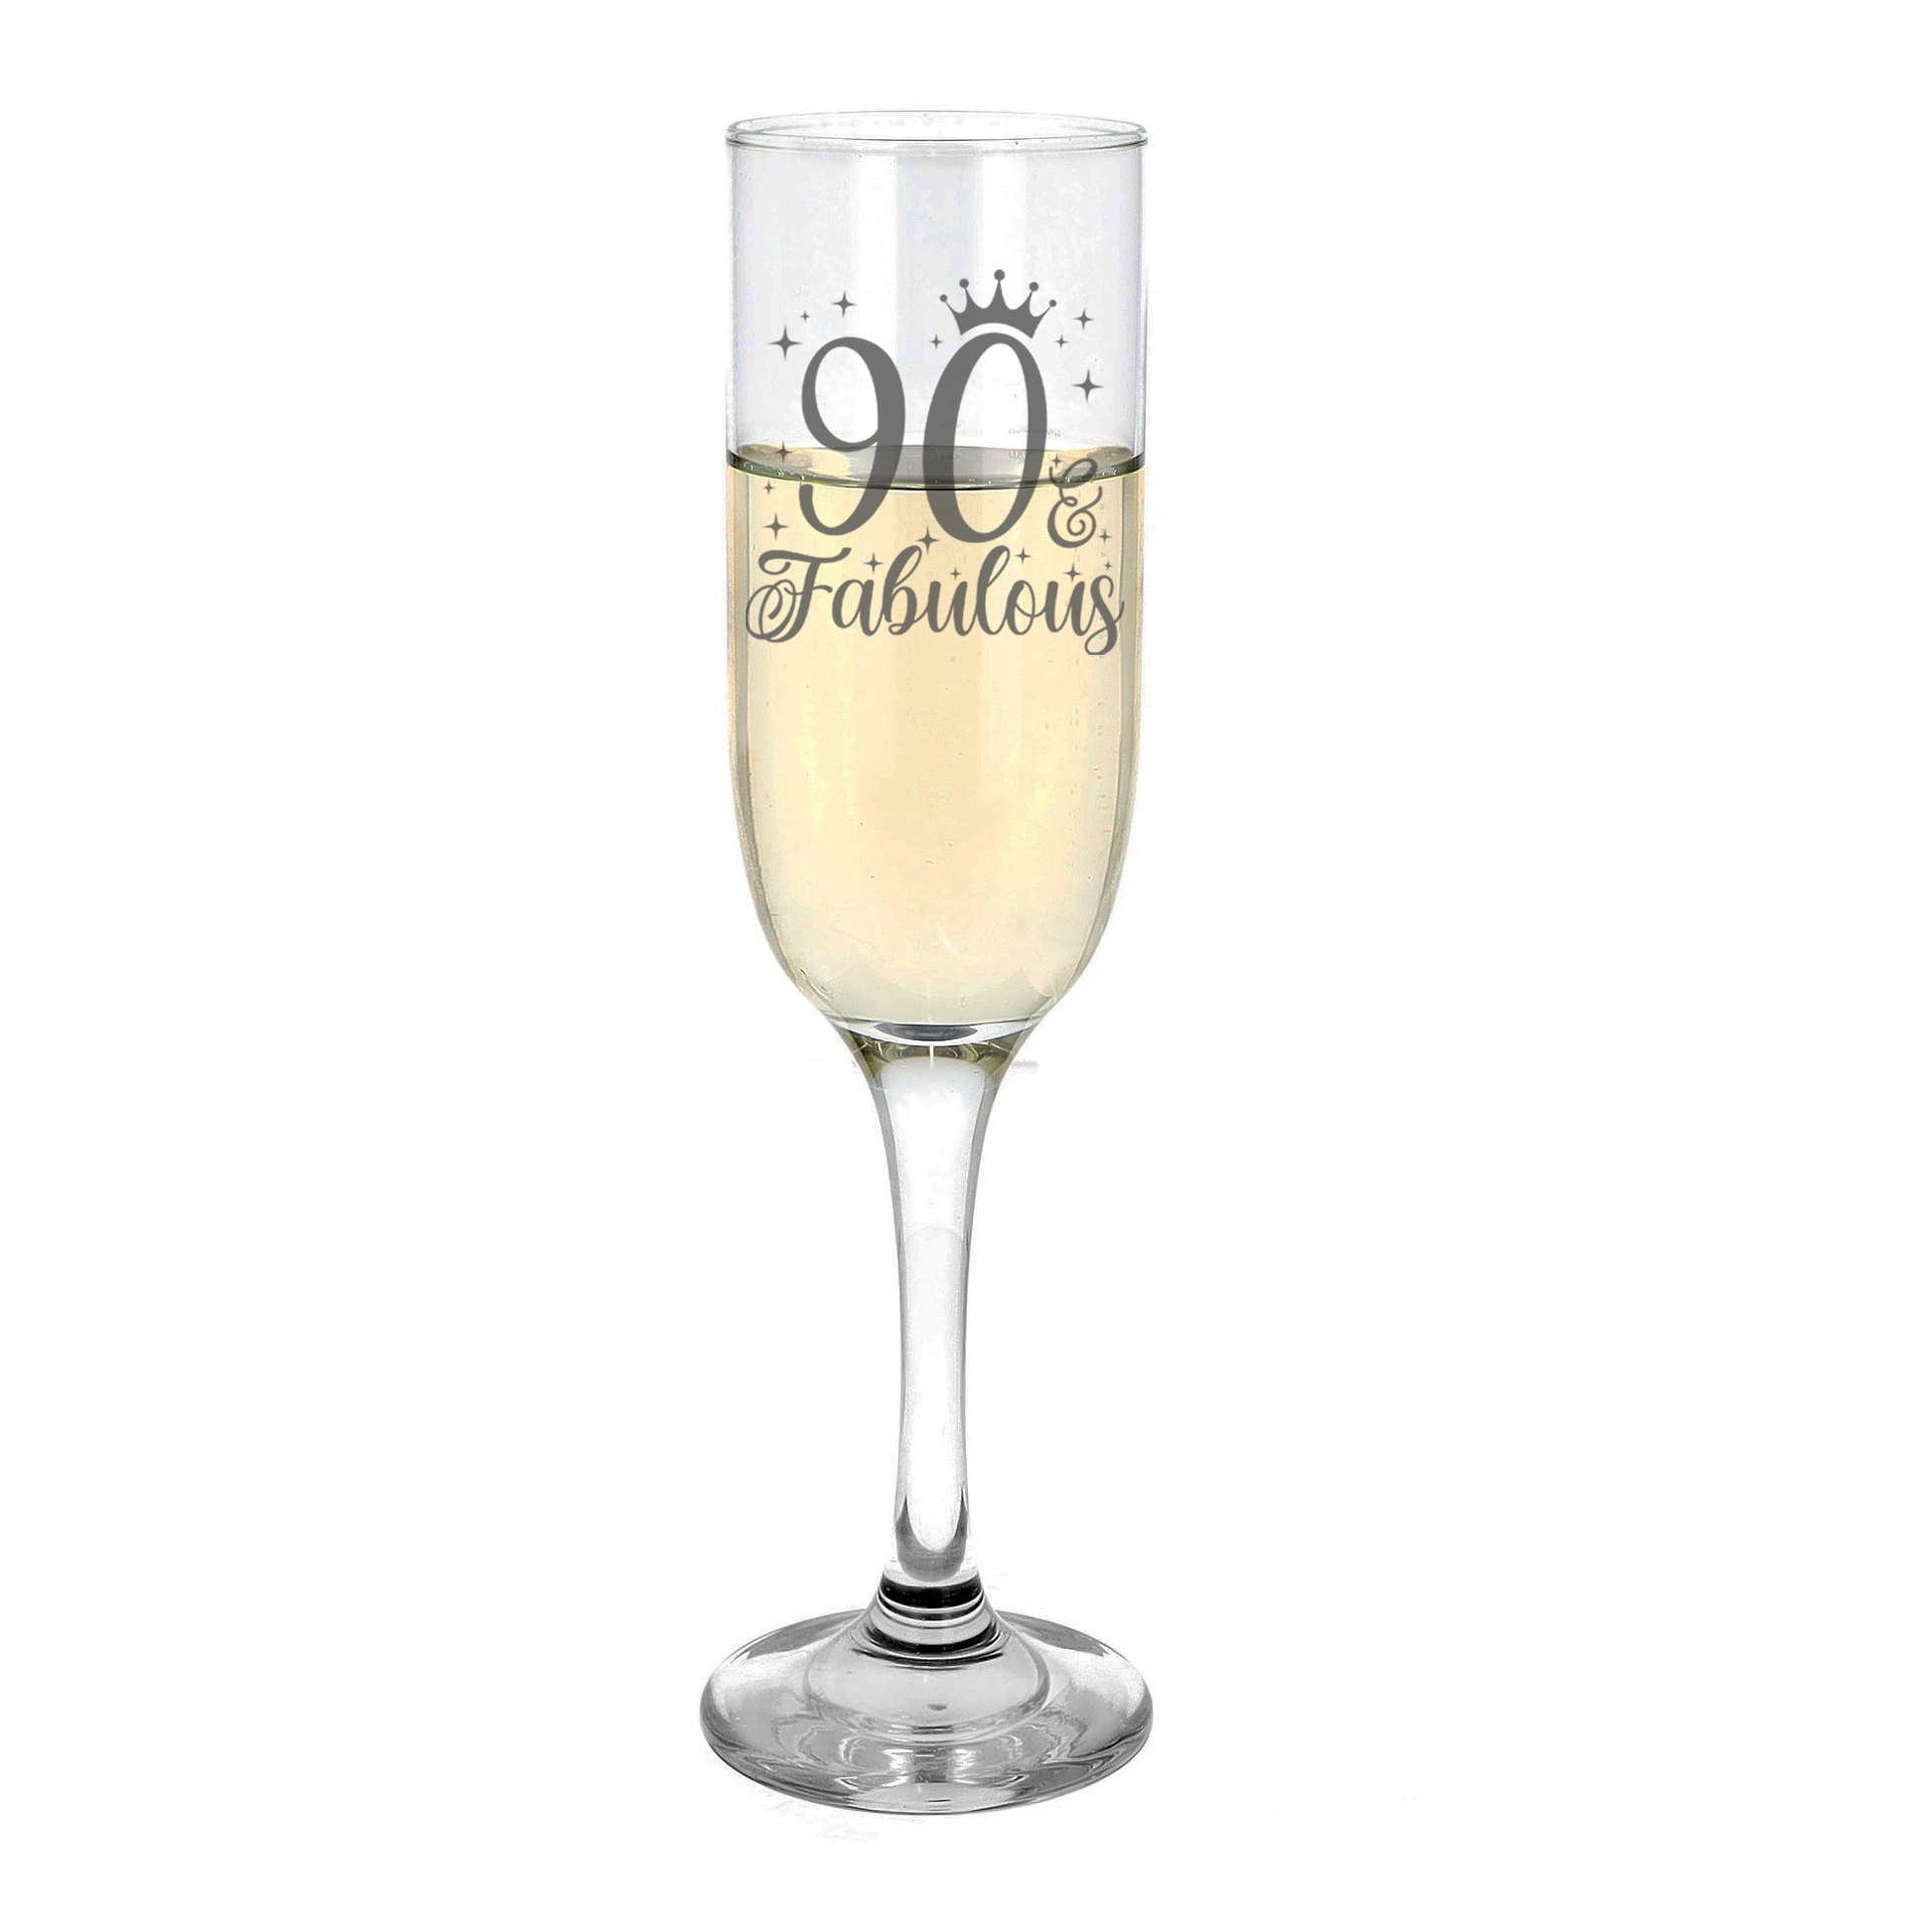 90 & Fabulous Engraved Champagne Glass and/or Coaster Set  - Always Looking Good -   